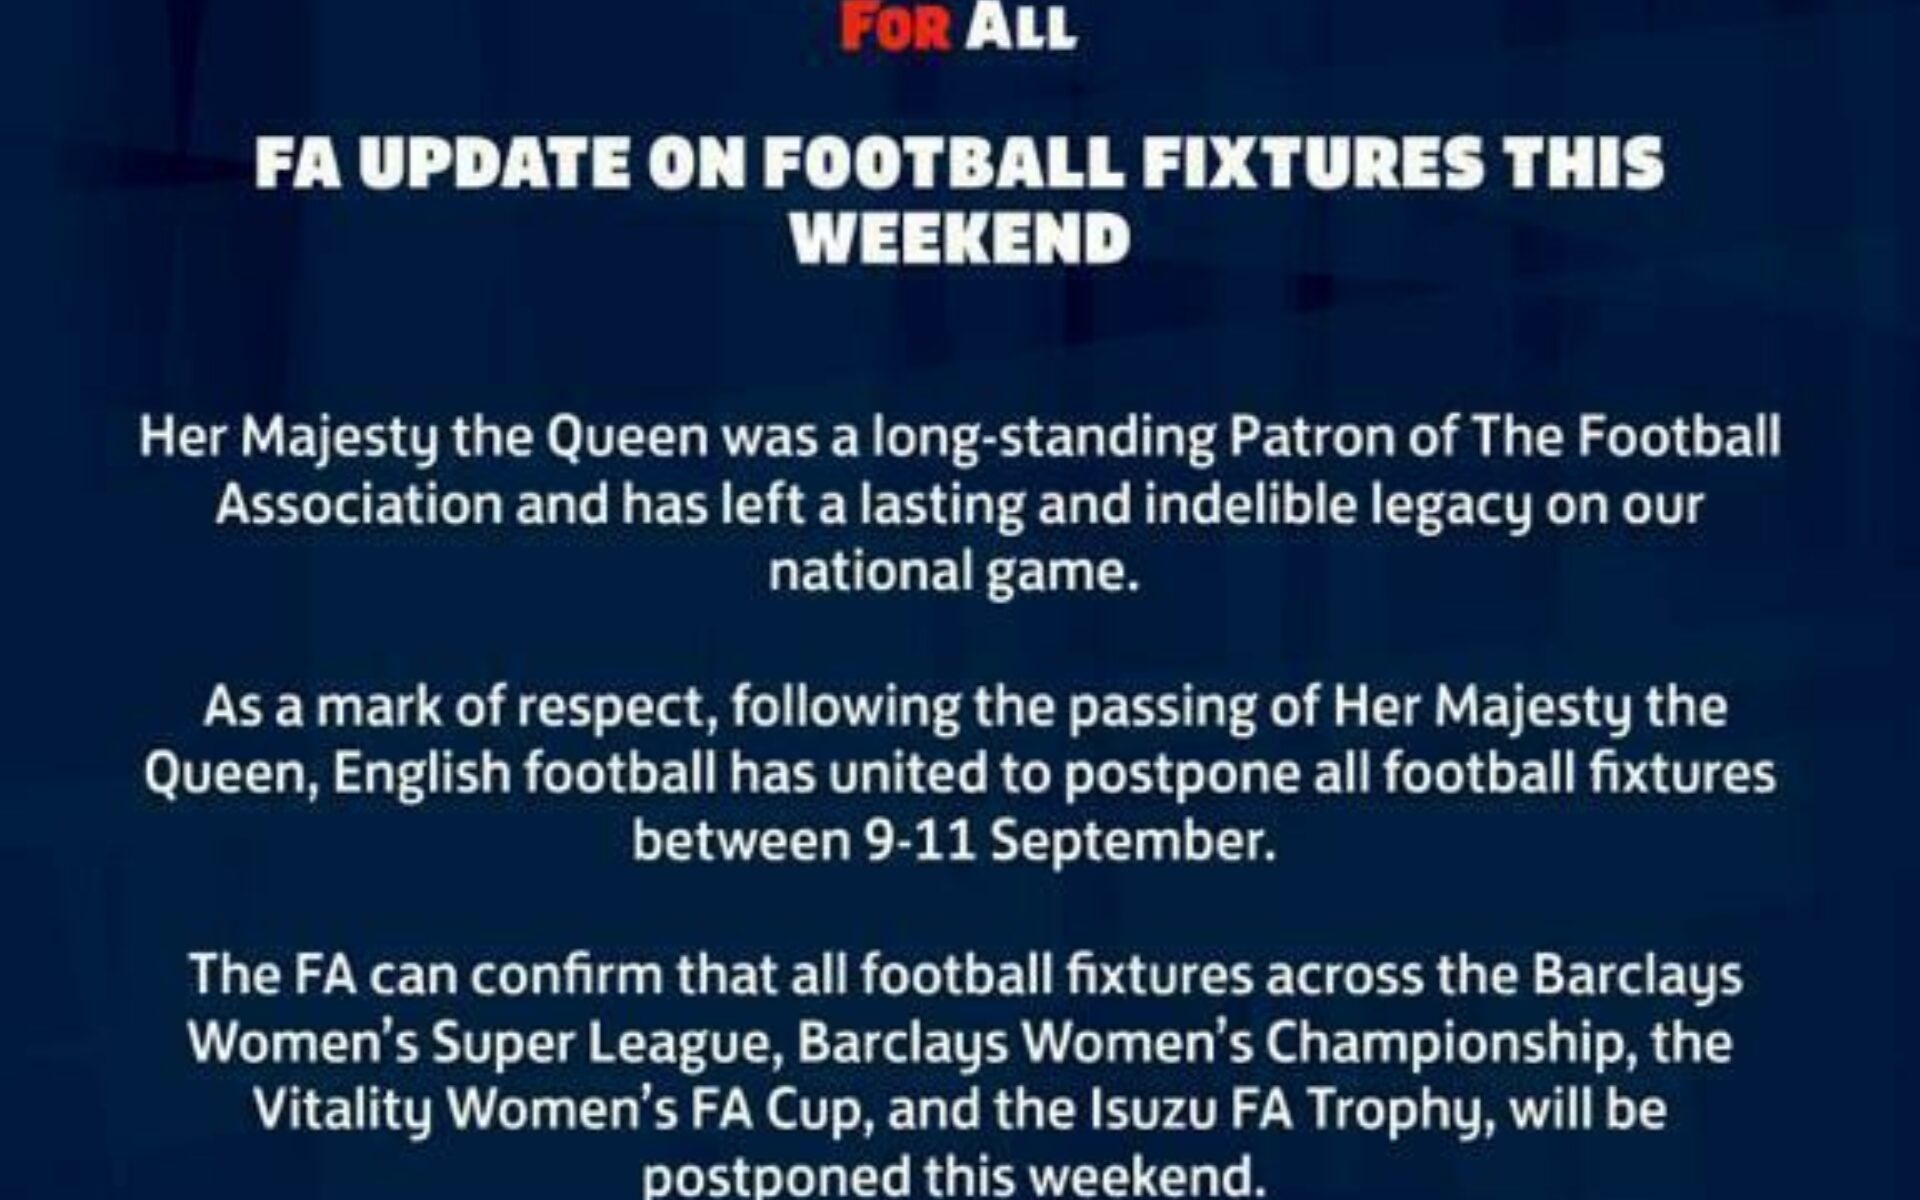 Witham Town Postponed Featured Image